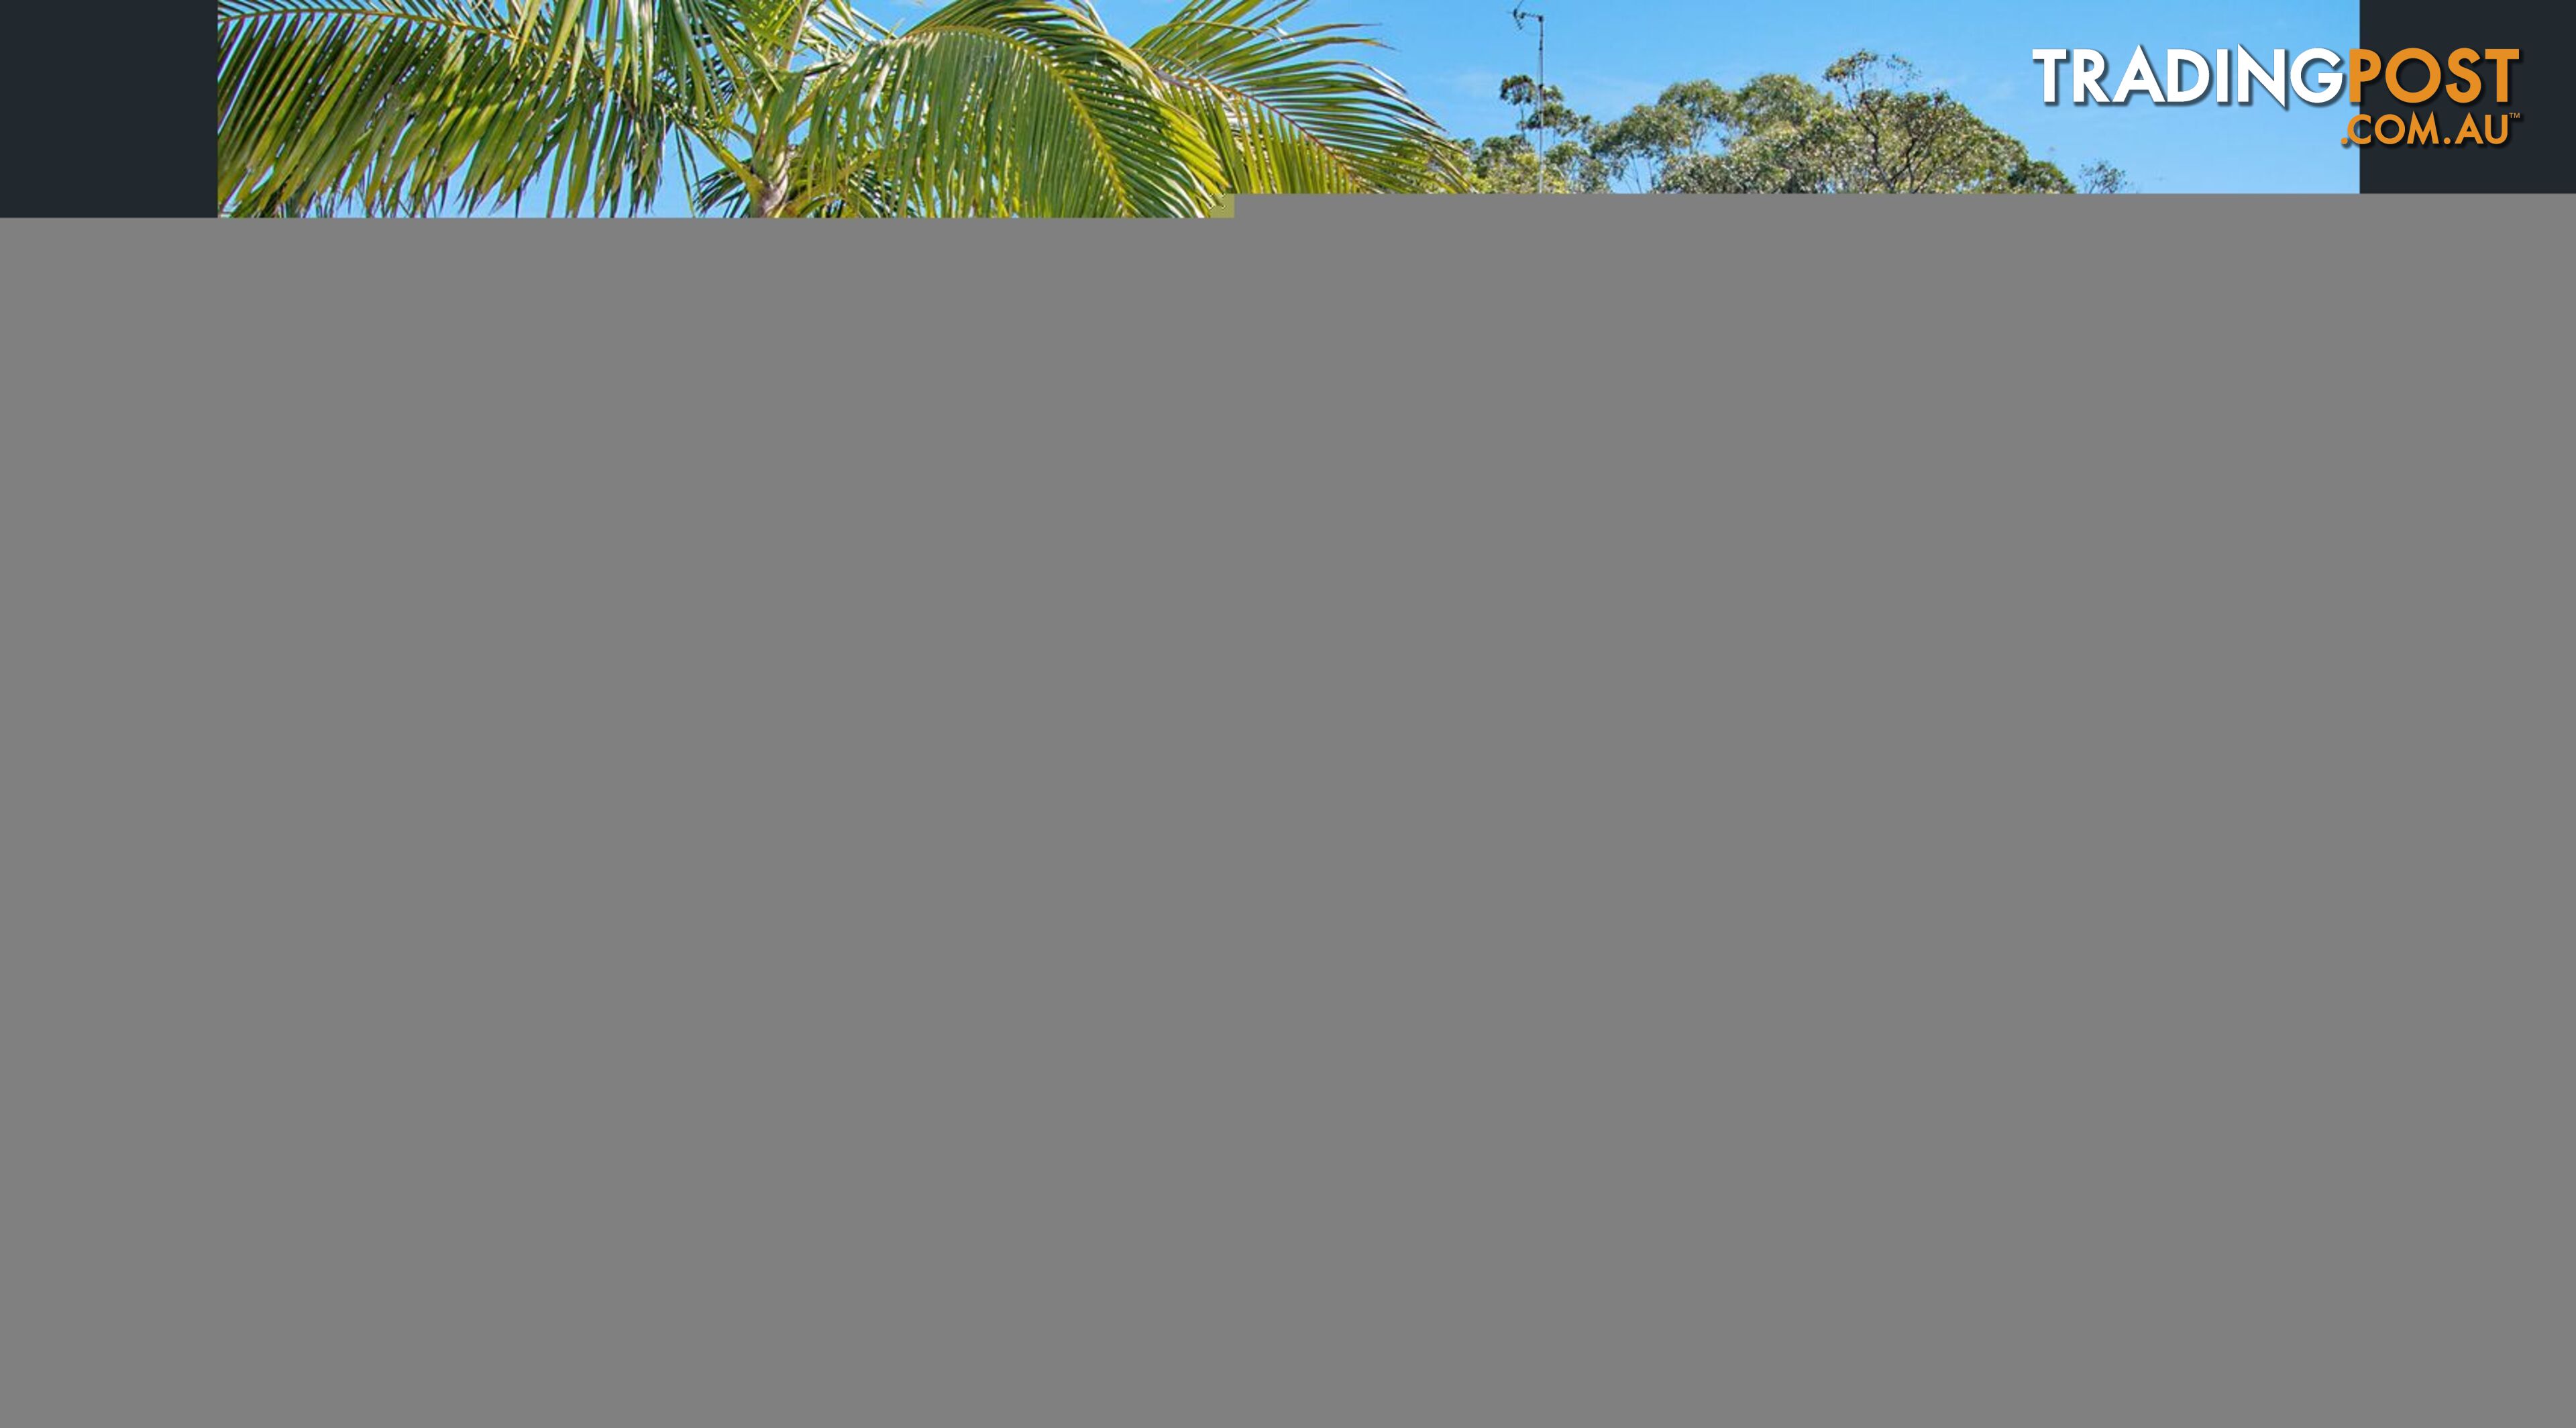 1/66 Blundell Boulevard TWEED HEADS SOUTH NSW 2486